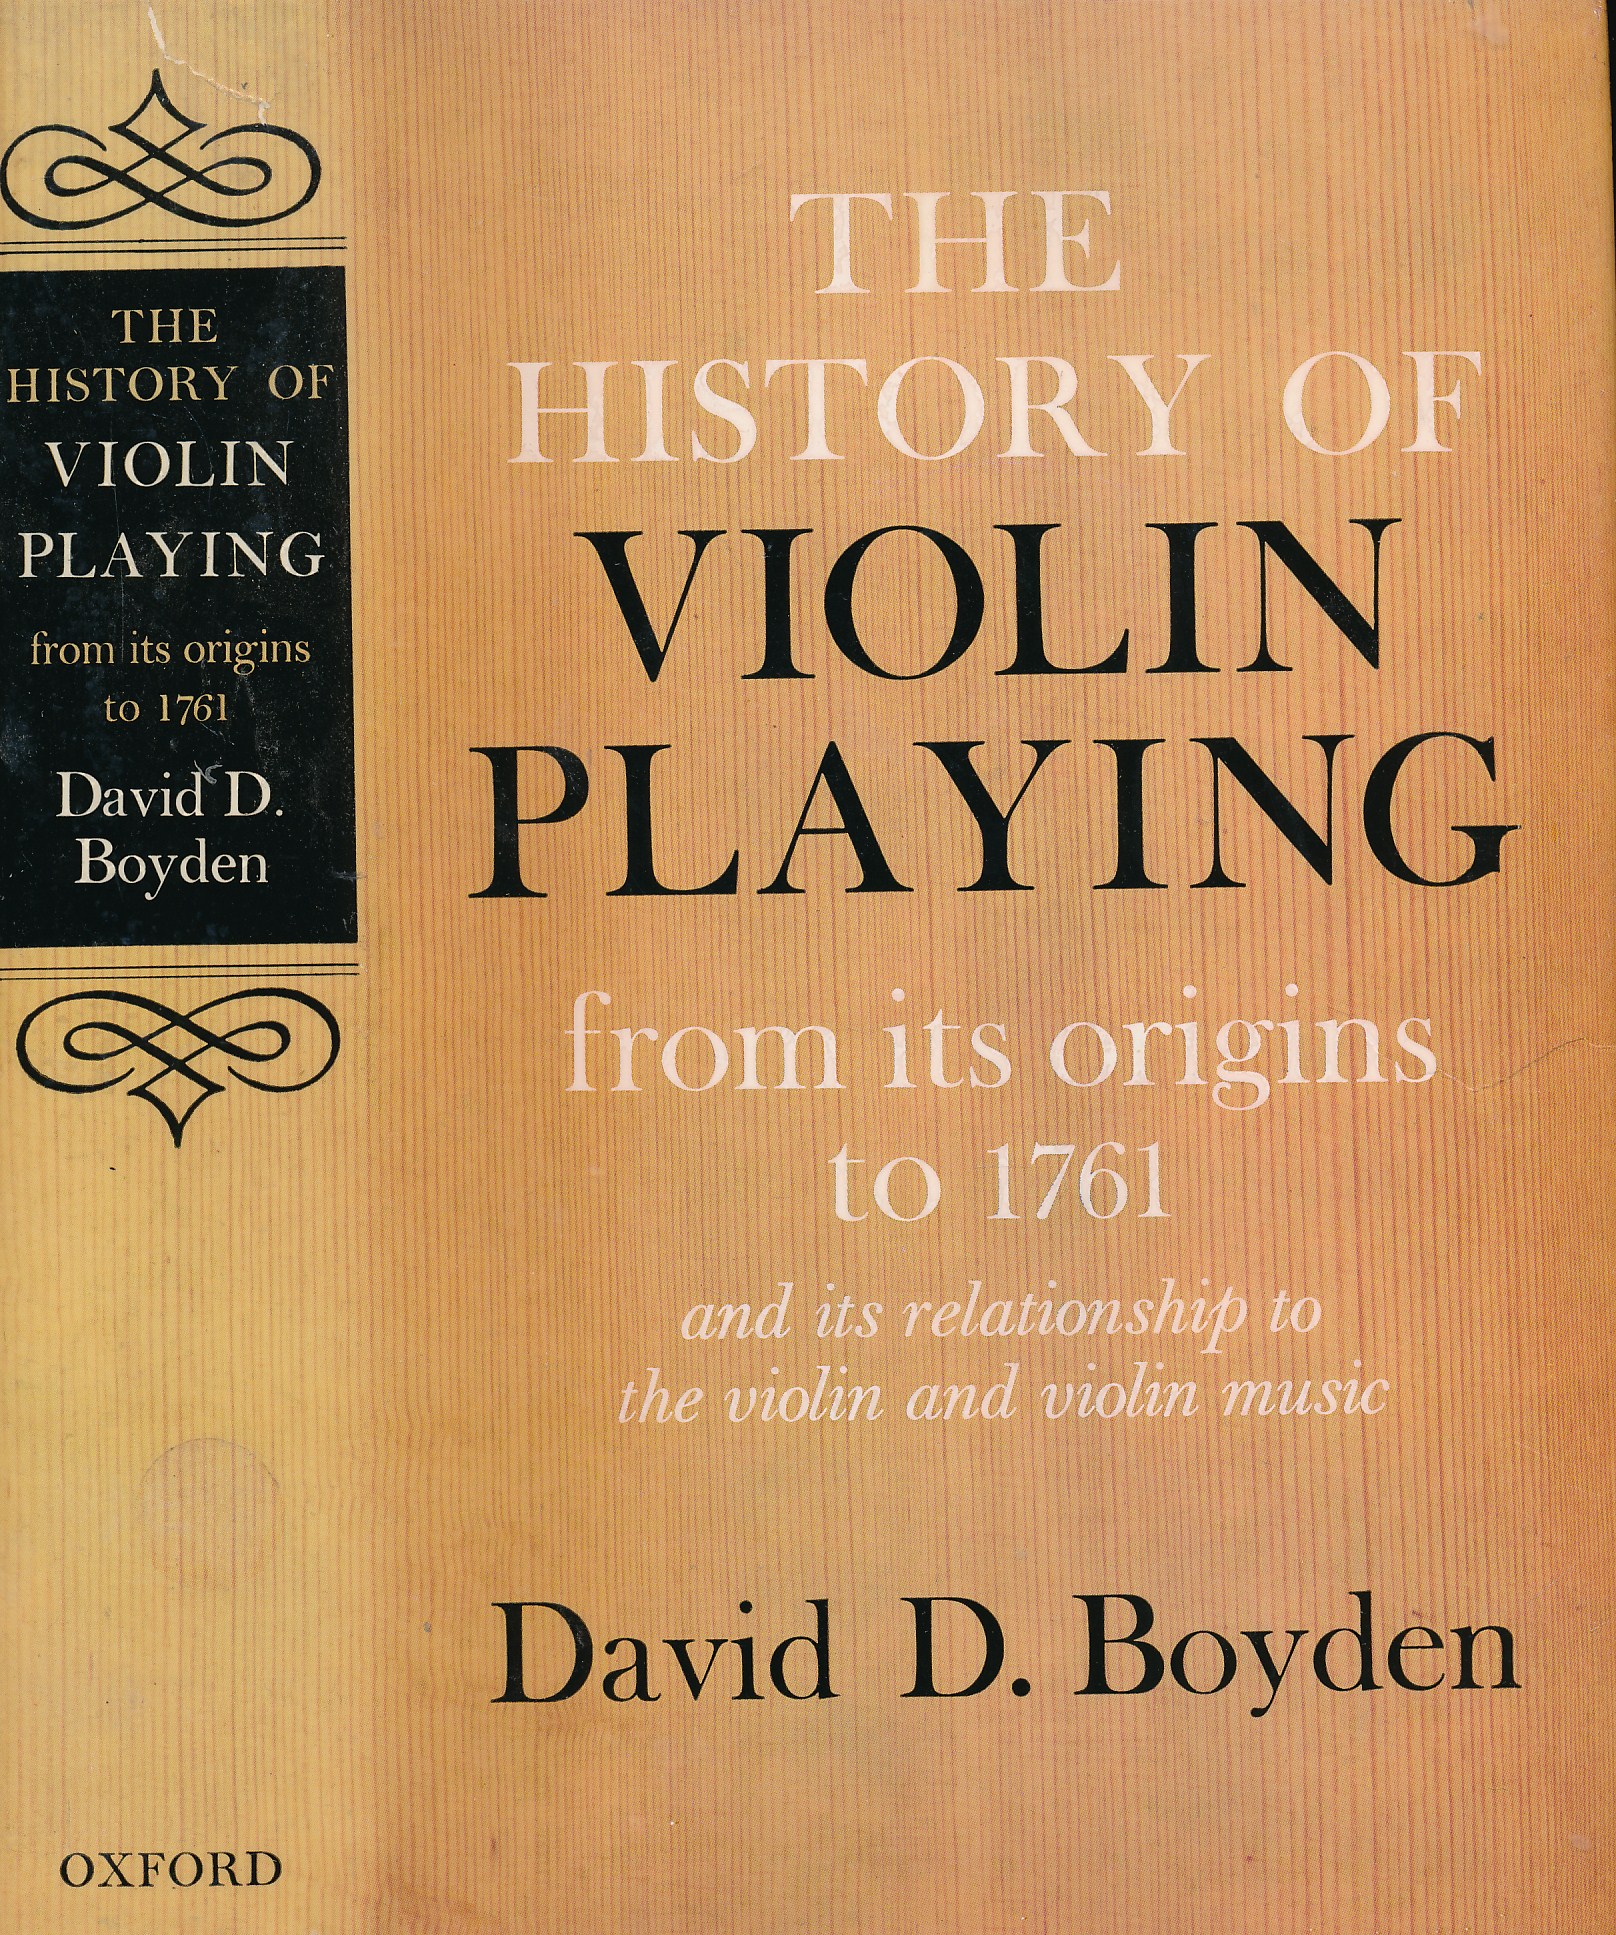 The History of Violin Playing from its Origins to 1761 and Its Relationship to the Violin and Violin Music.